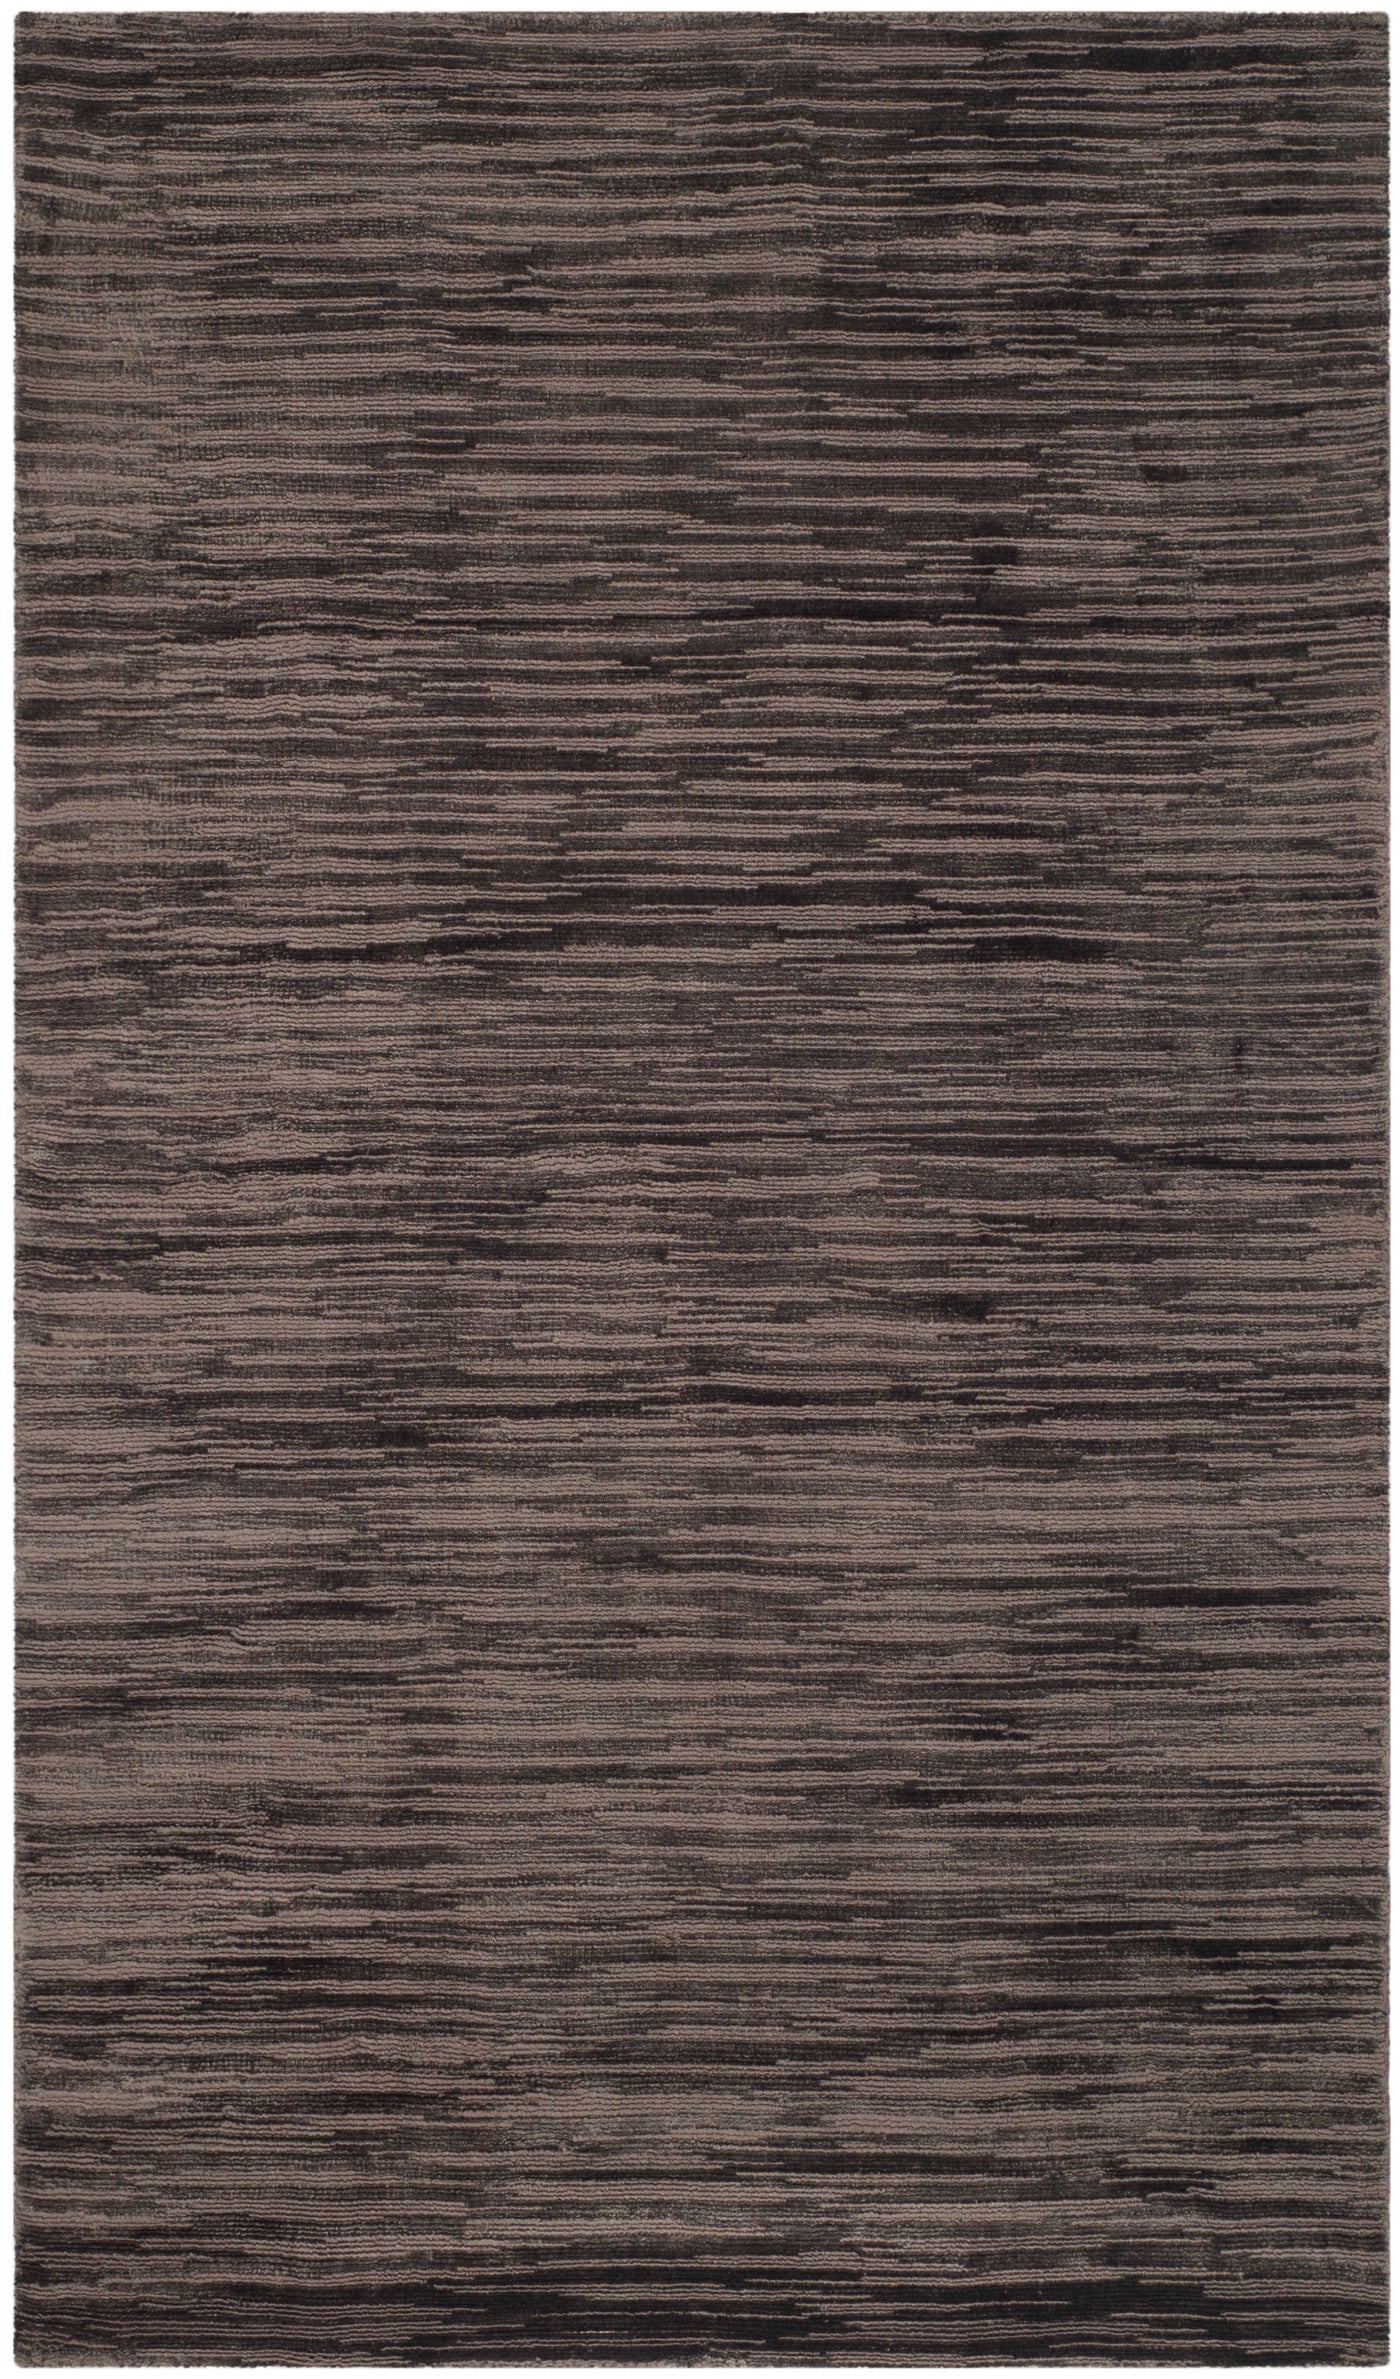 Buy Mirage Mir635a Online At The Lowest Price Select Rugs Canada